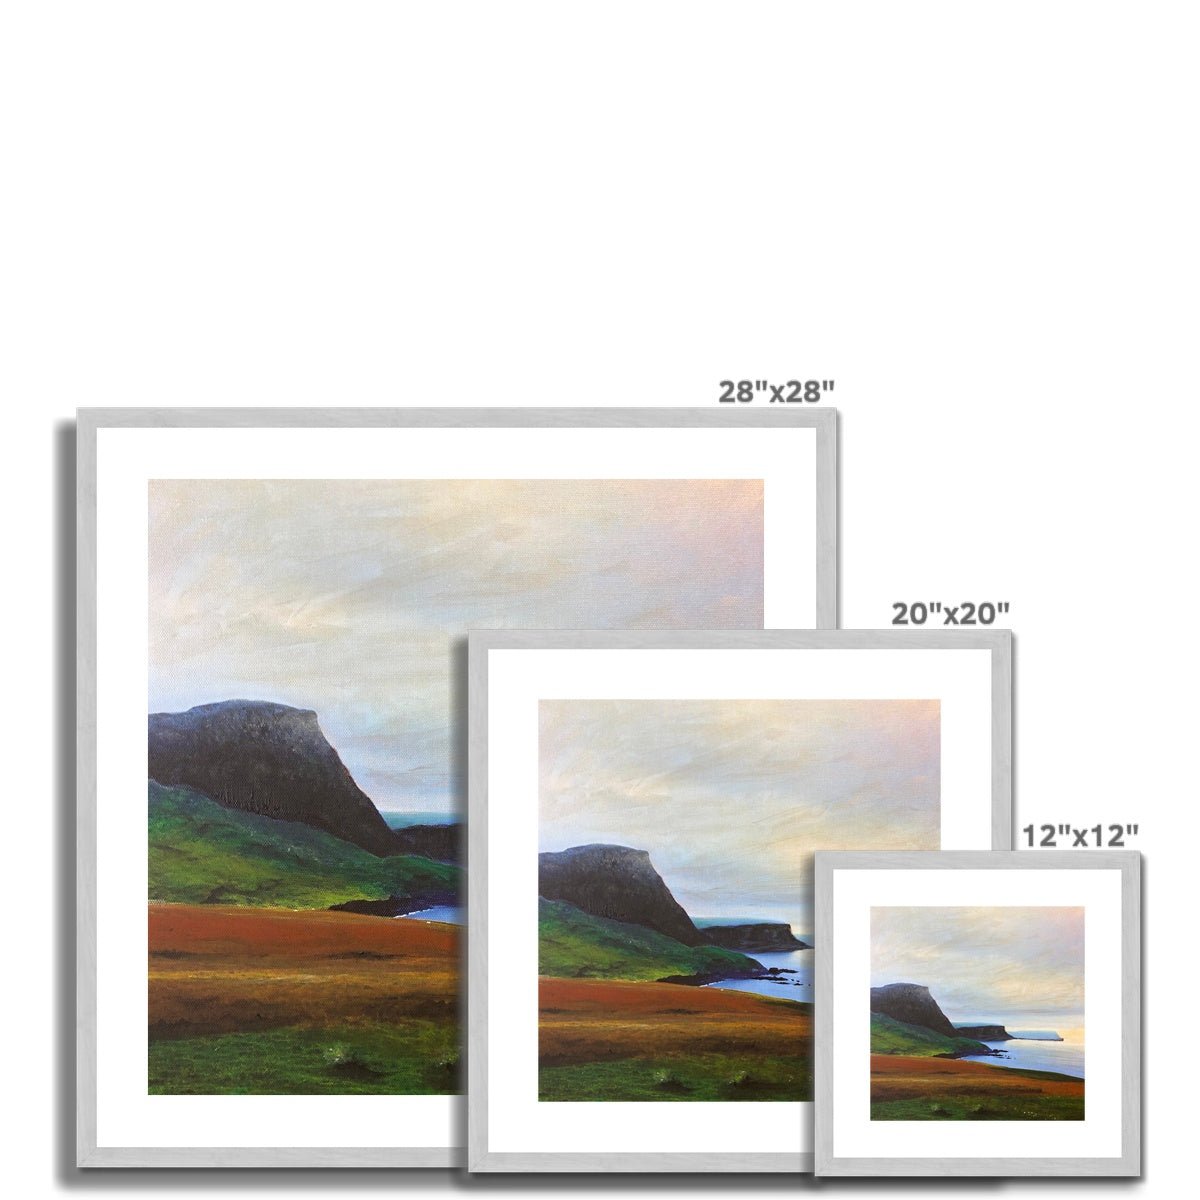 Neist Point Cliffs Skye Painting | Antique Framed & Mounted Prints From Scotland-Antique Framed & Mounted Prints-Skye Art Gallery-Paintings, Prints, Homeware, Art Gifts From Scotland By Scottish Artist Kevin Hunter